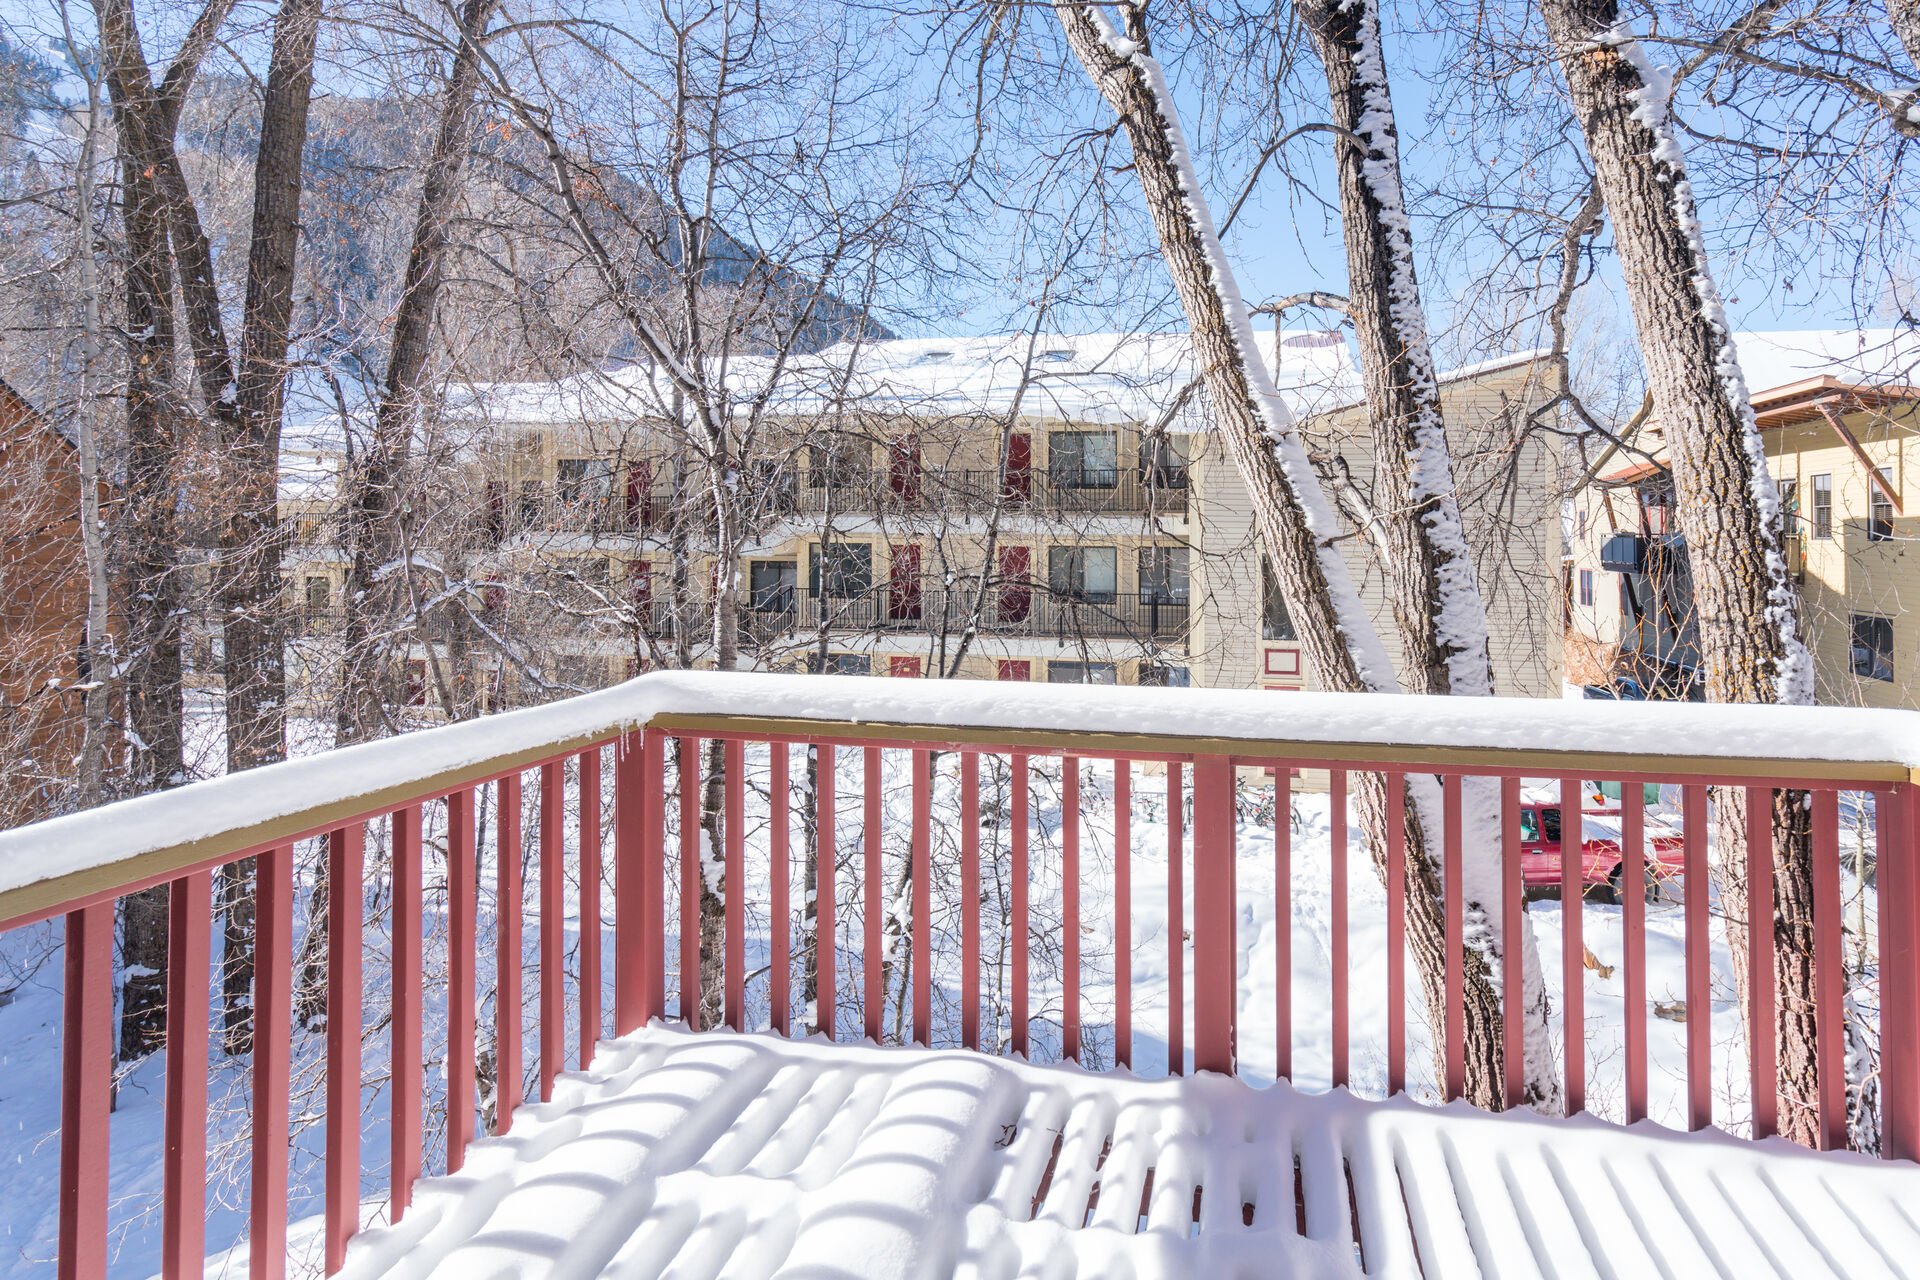 View from the Deck of our Telluride Condo Rental